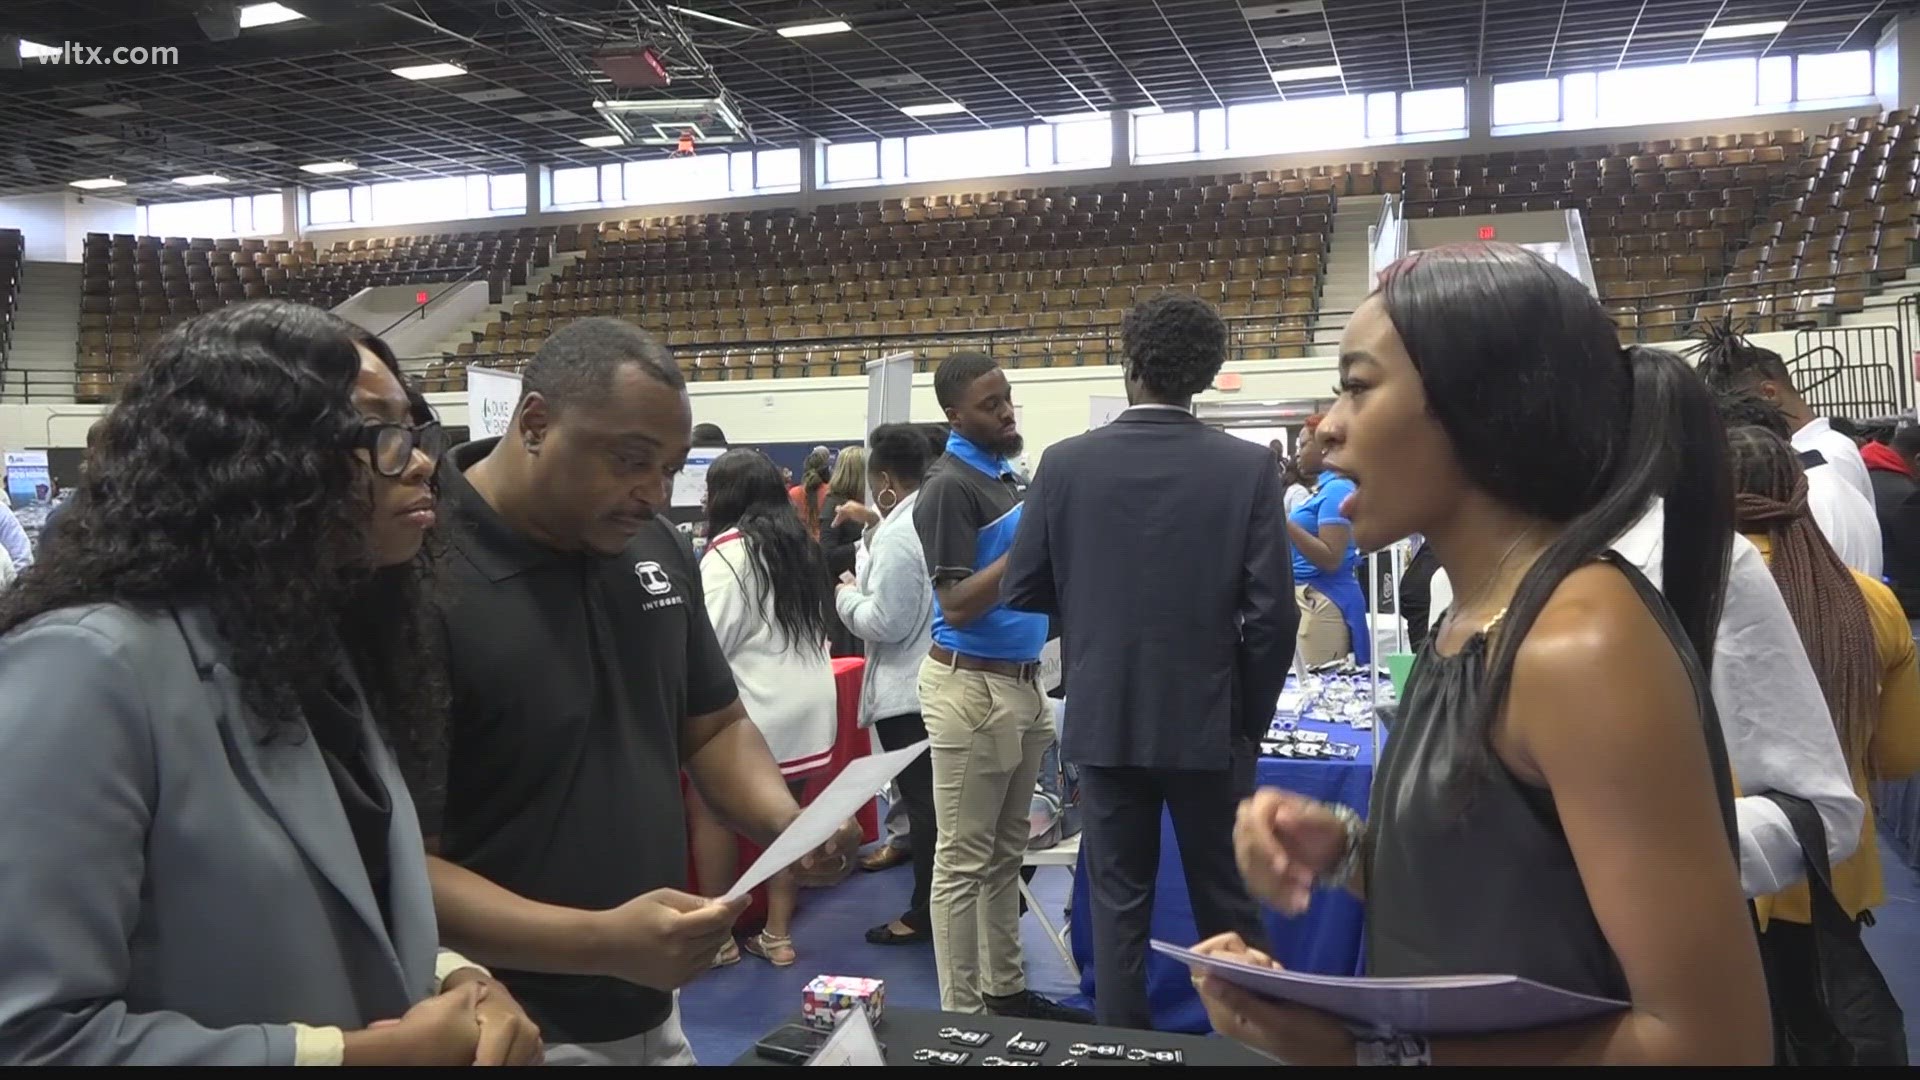 Over 100 businesses showed up hoping to attract fall graduates.